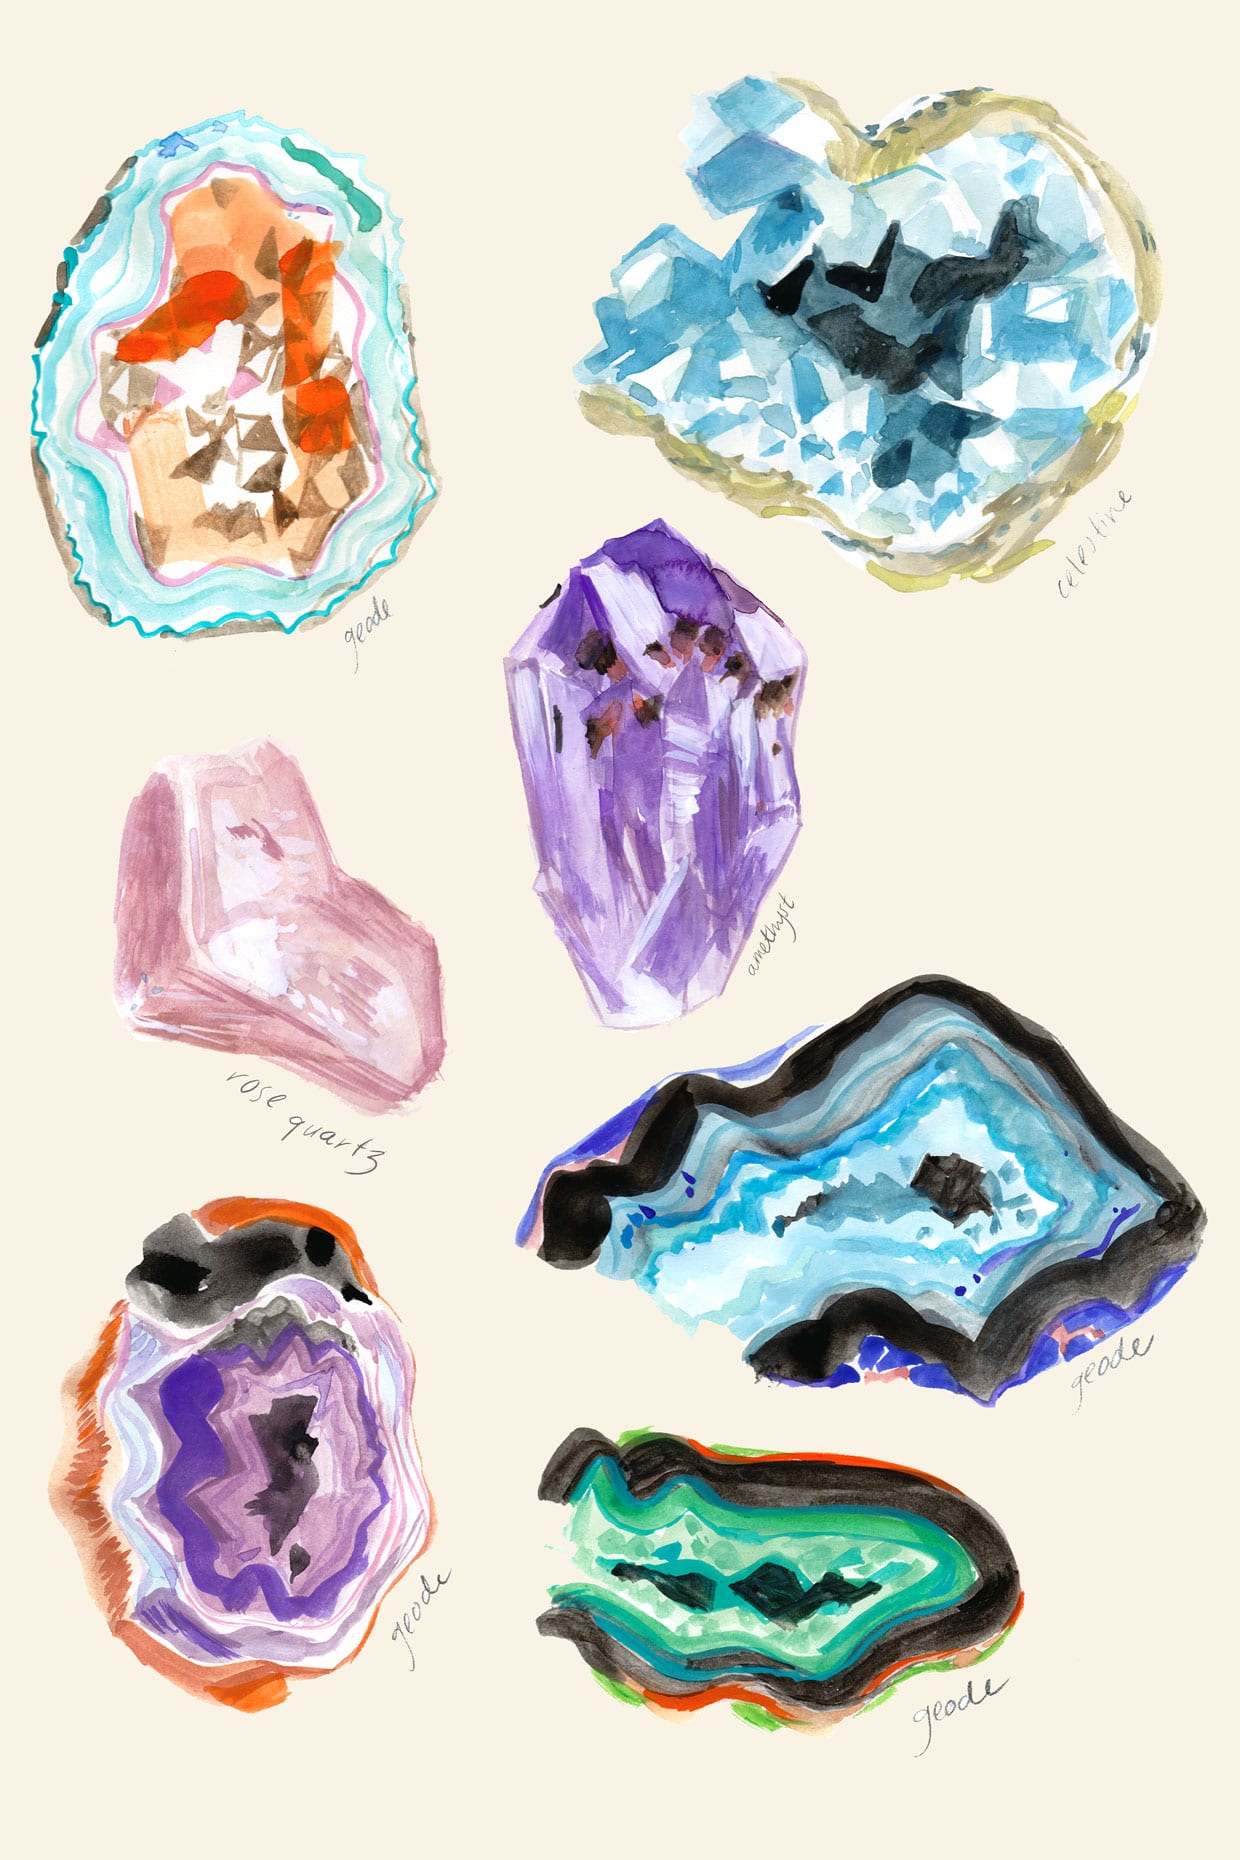 An illustration of gems and geodes.